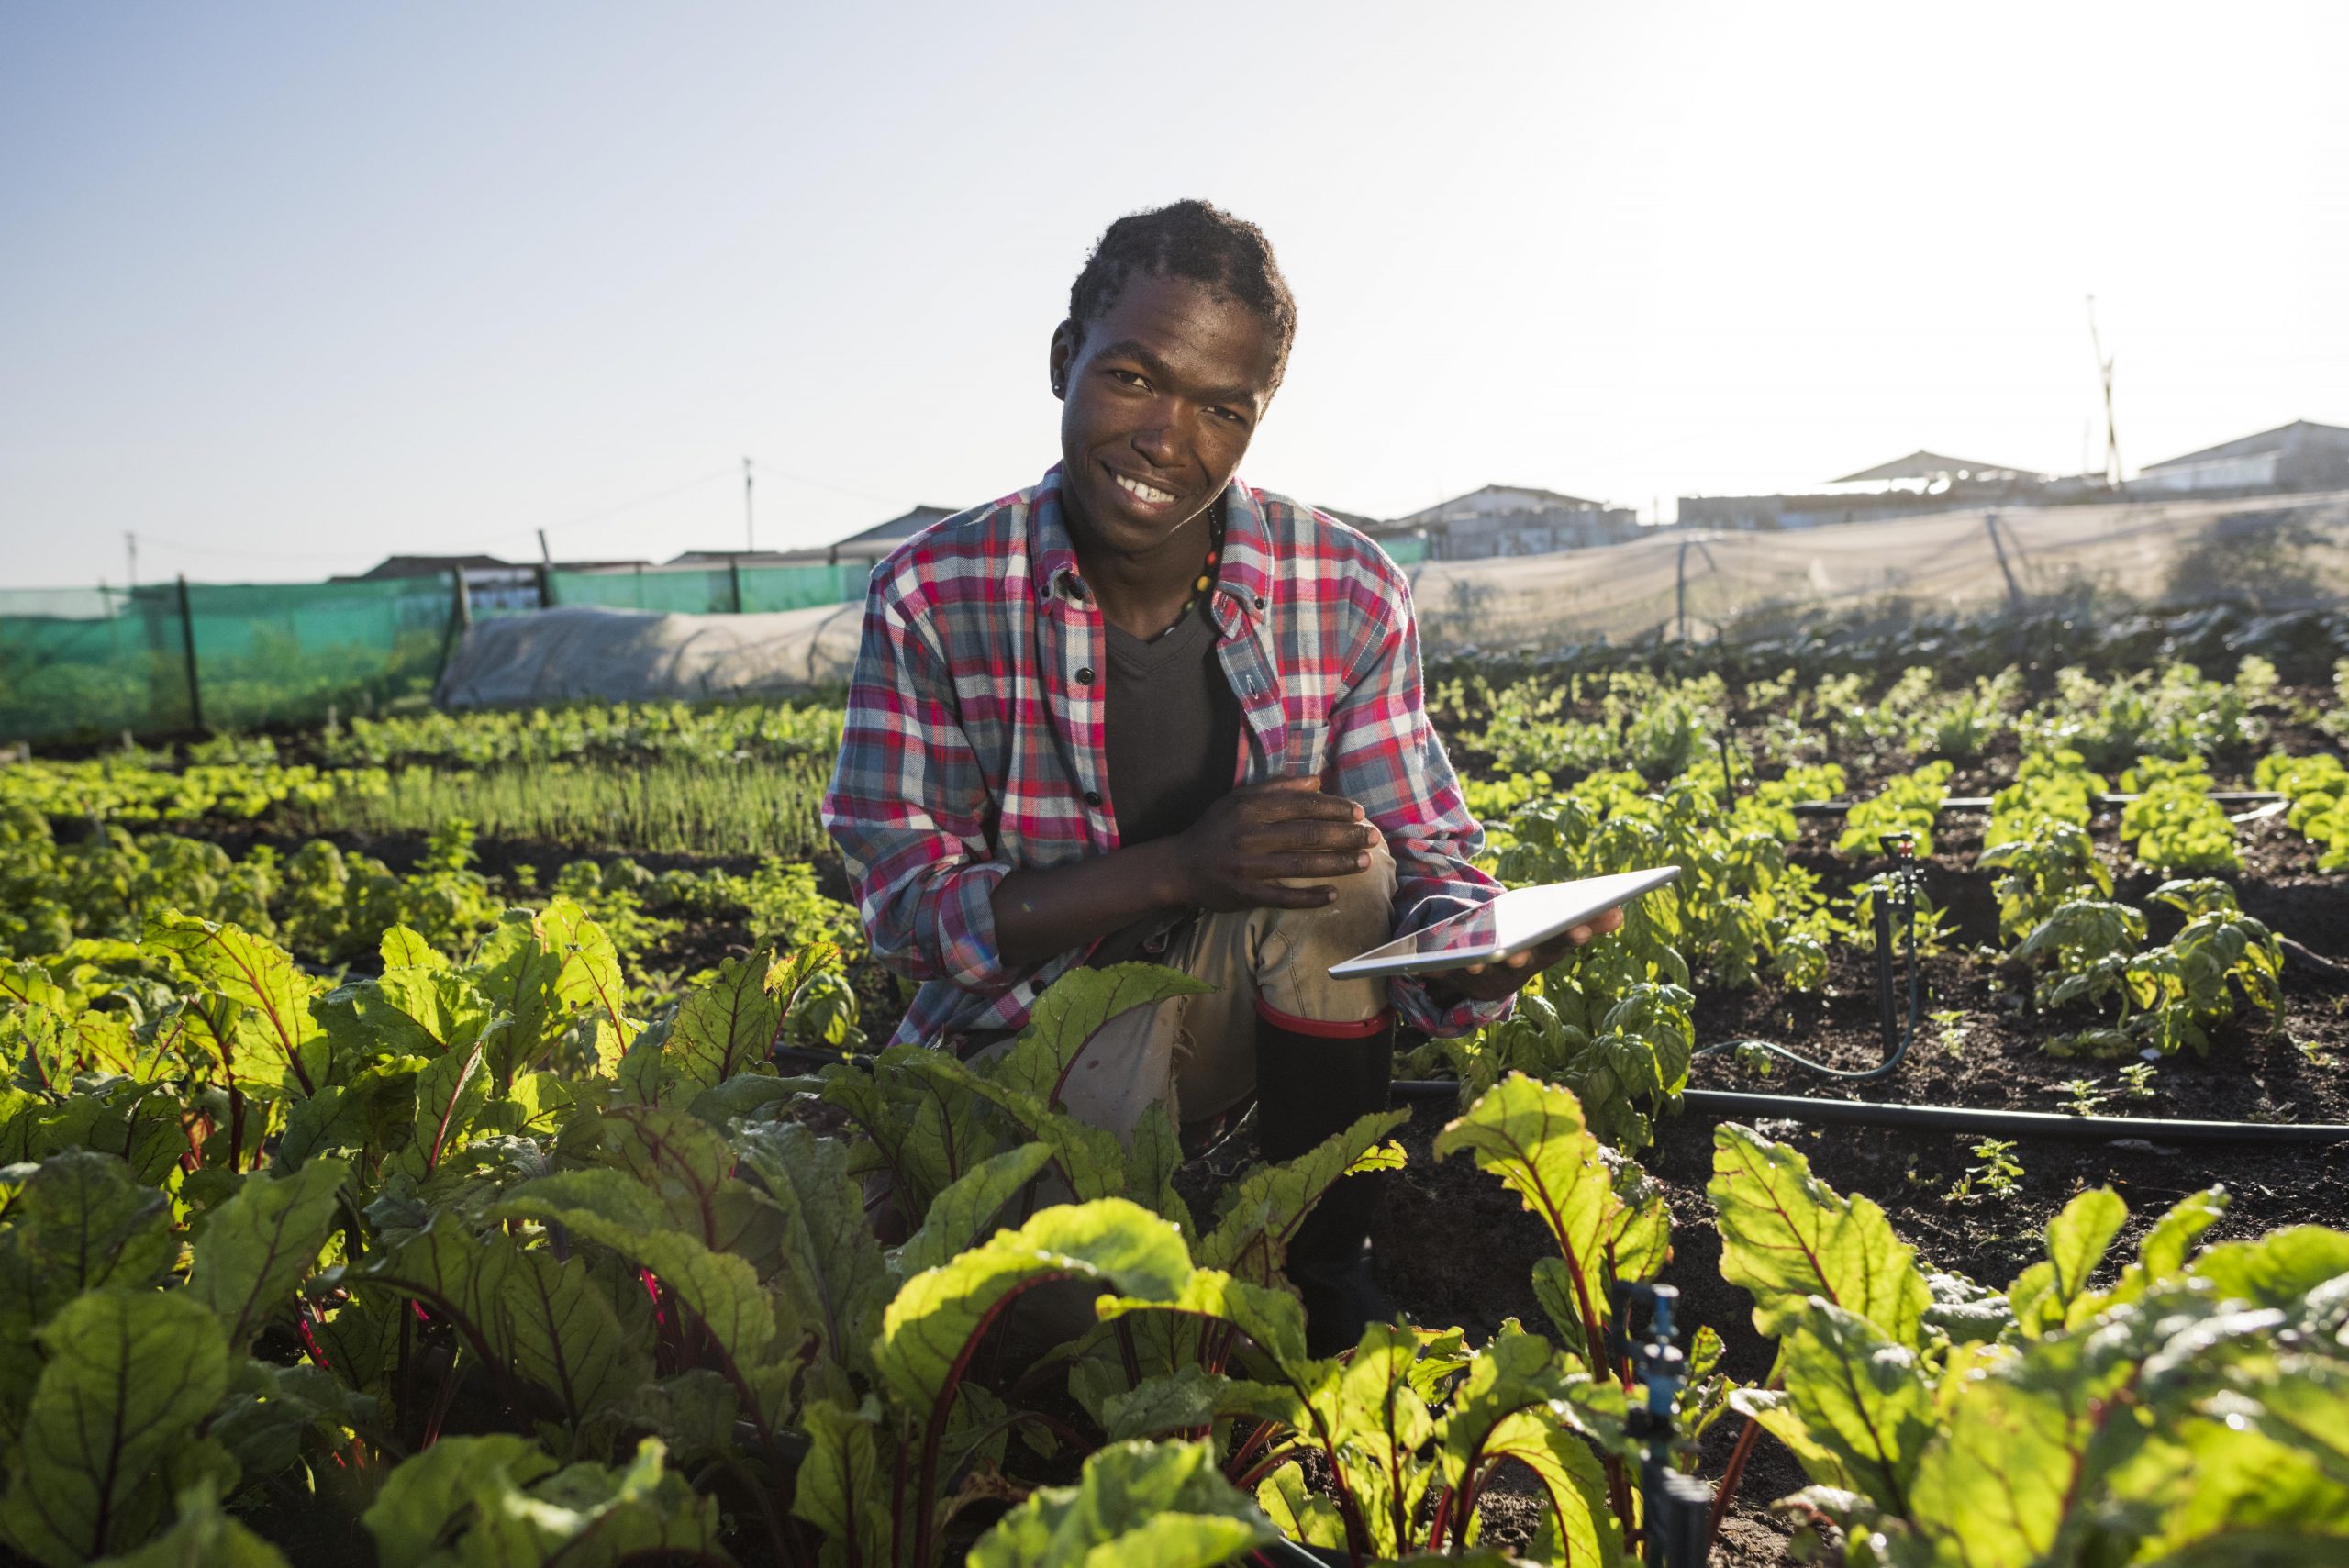 A morning backlit image of a young African male in his vegetable garden, he sits on his haunches holding a tablet while smiling at the camera.